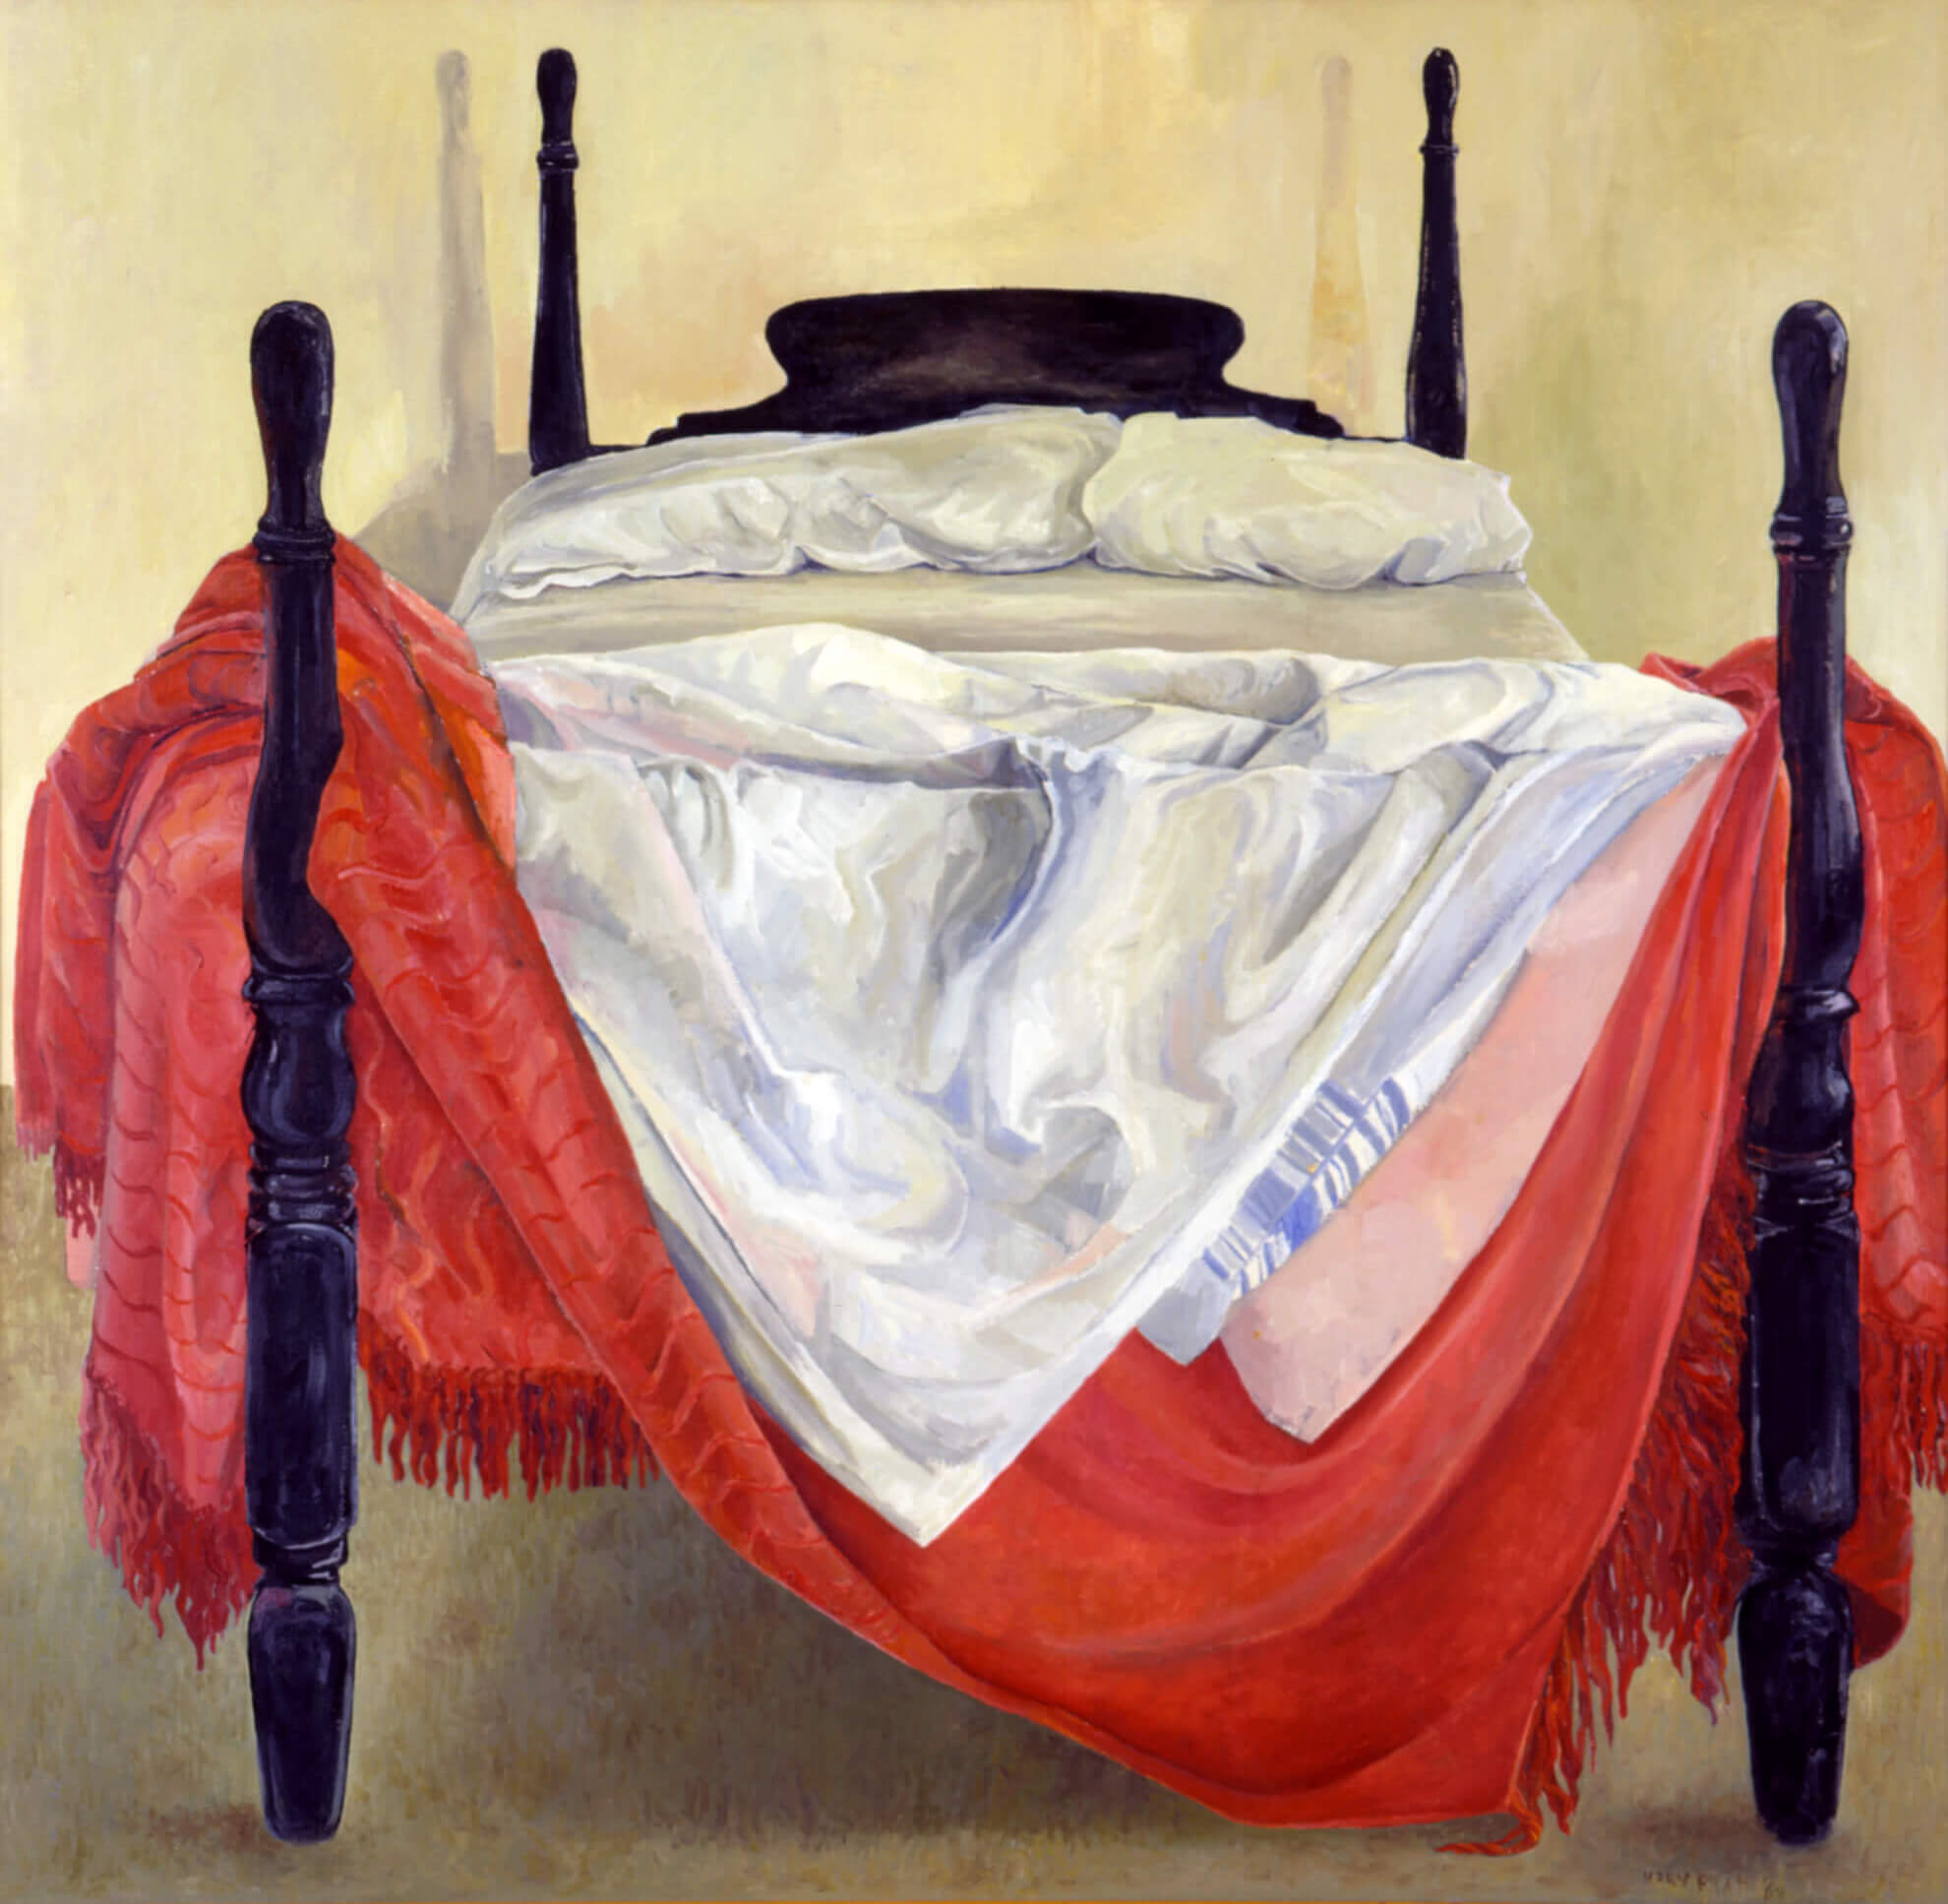 The Bed, 1968